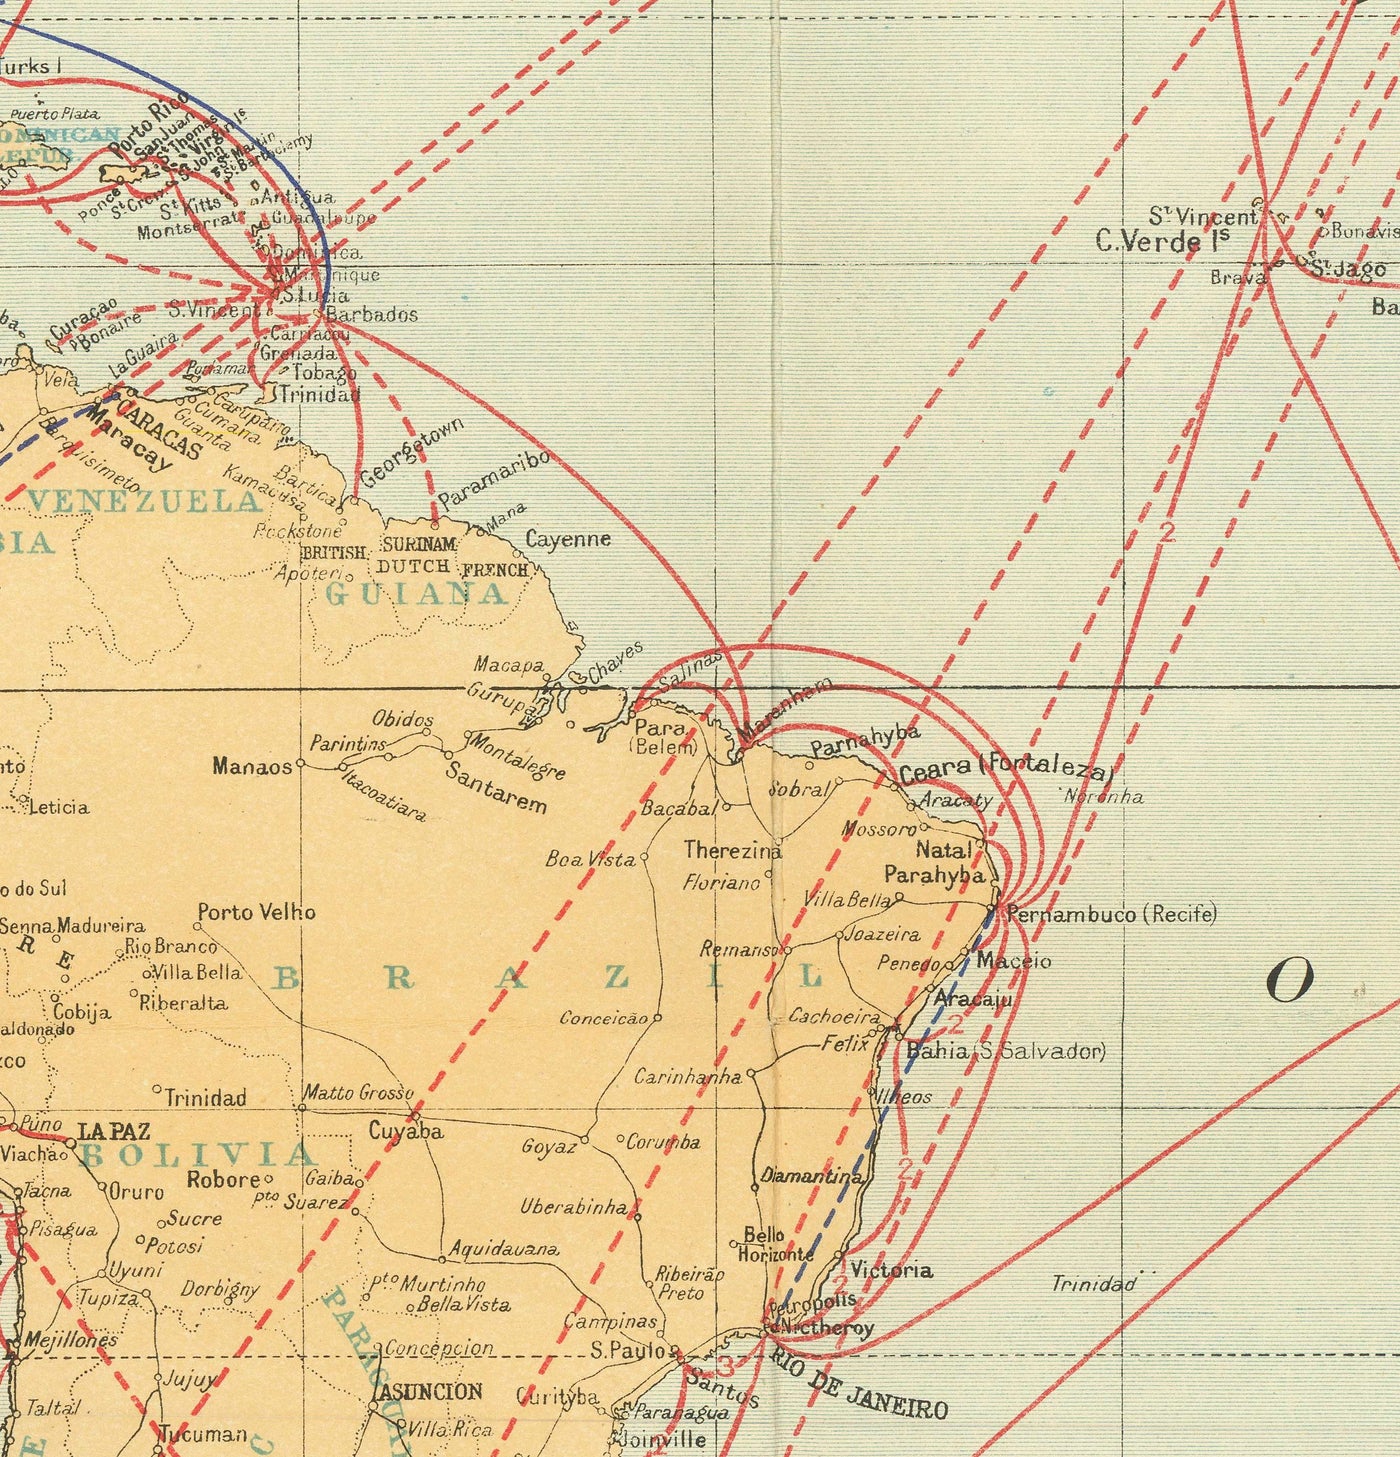 Old Cable and Wireless World Map, 1938 - (Very Early) Internet & Submarine Telegraph Chart